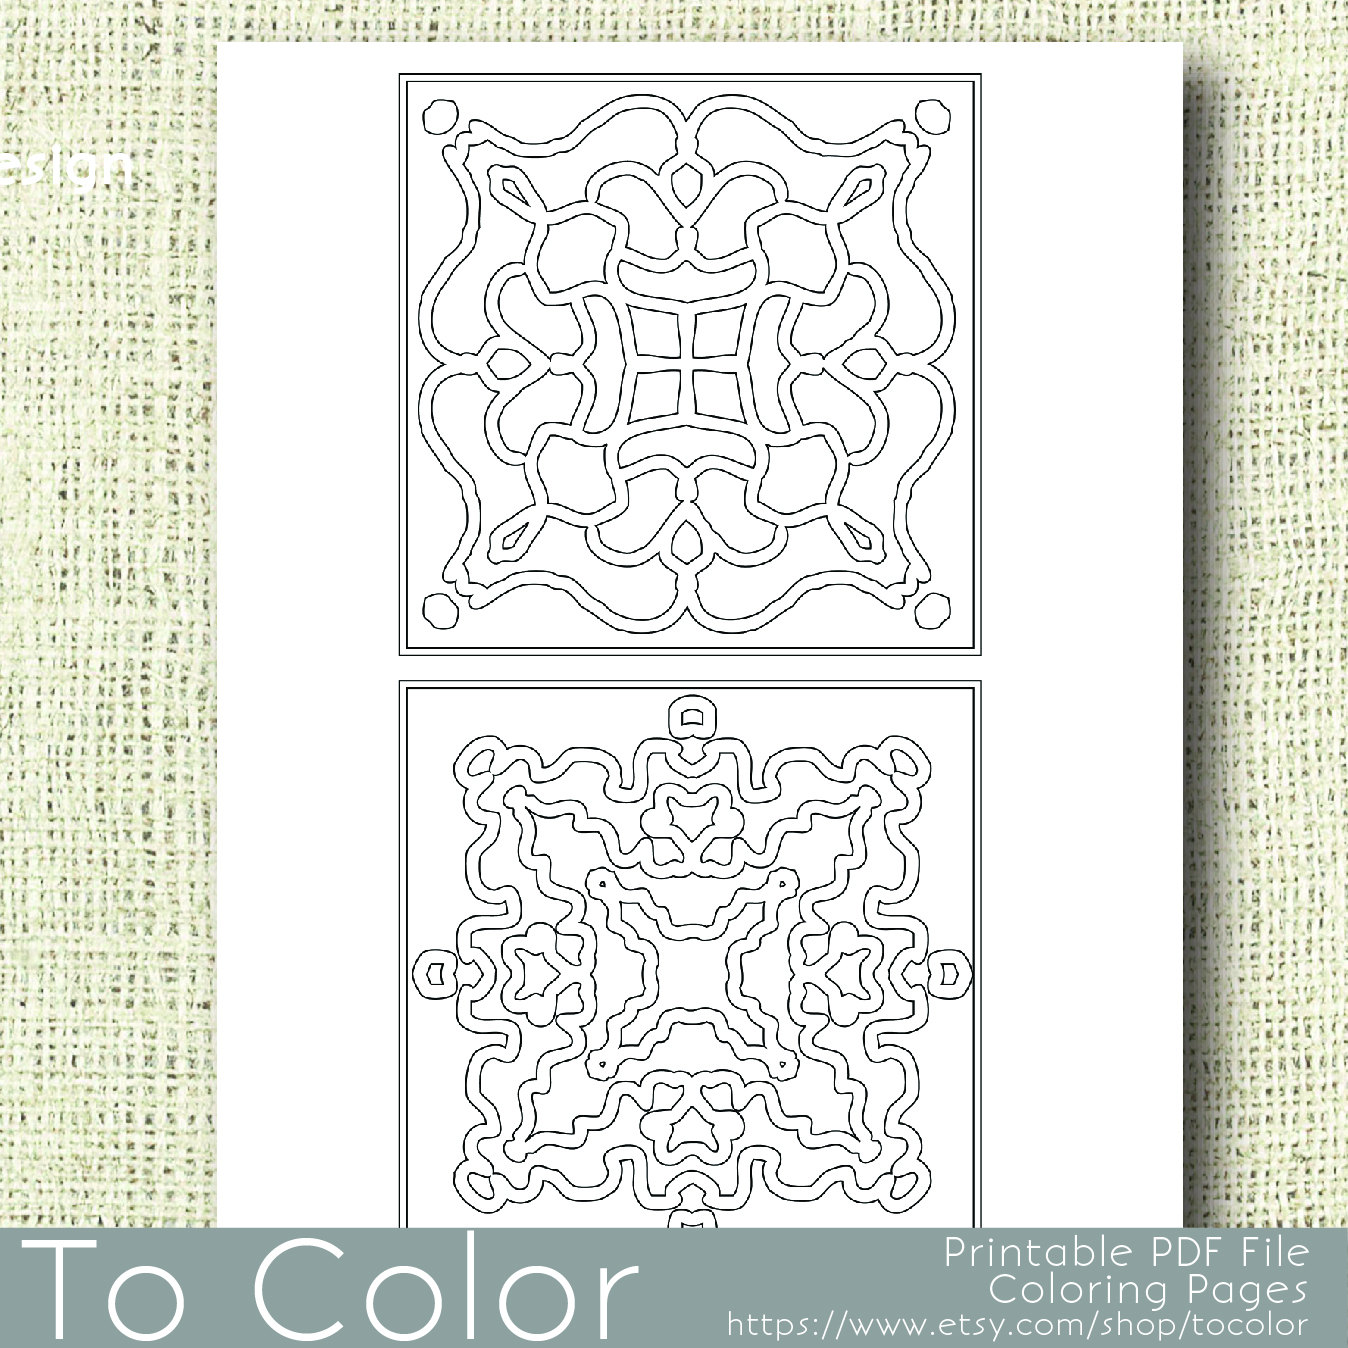 Download Printable Coloring Pages for Adults Two Half Size by ToColor